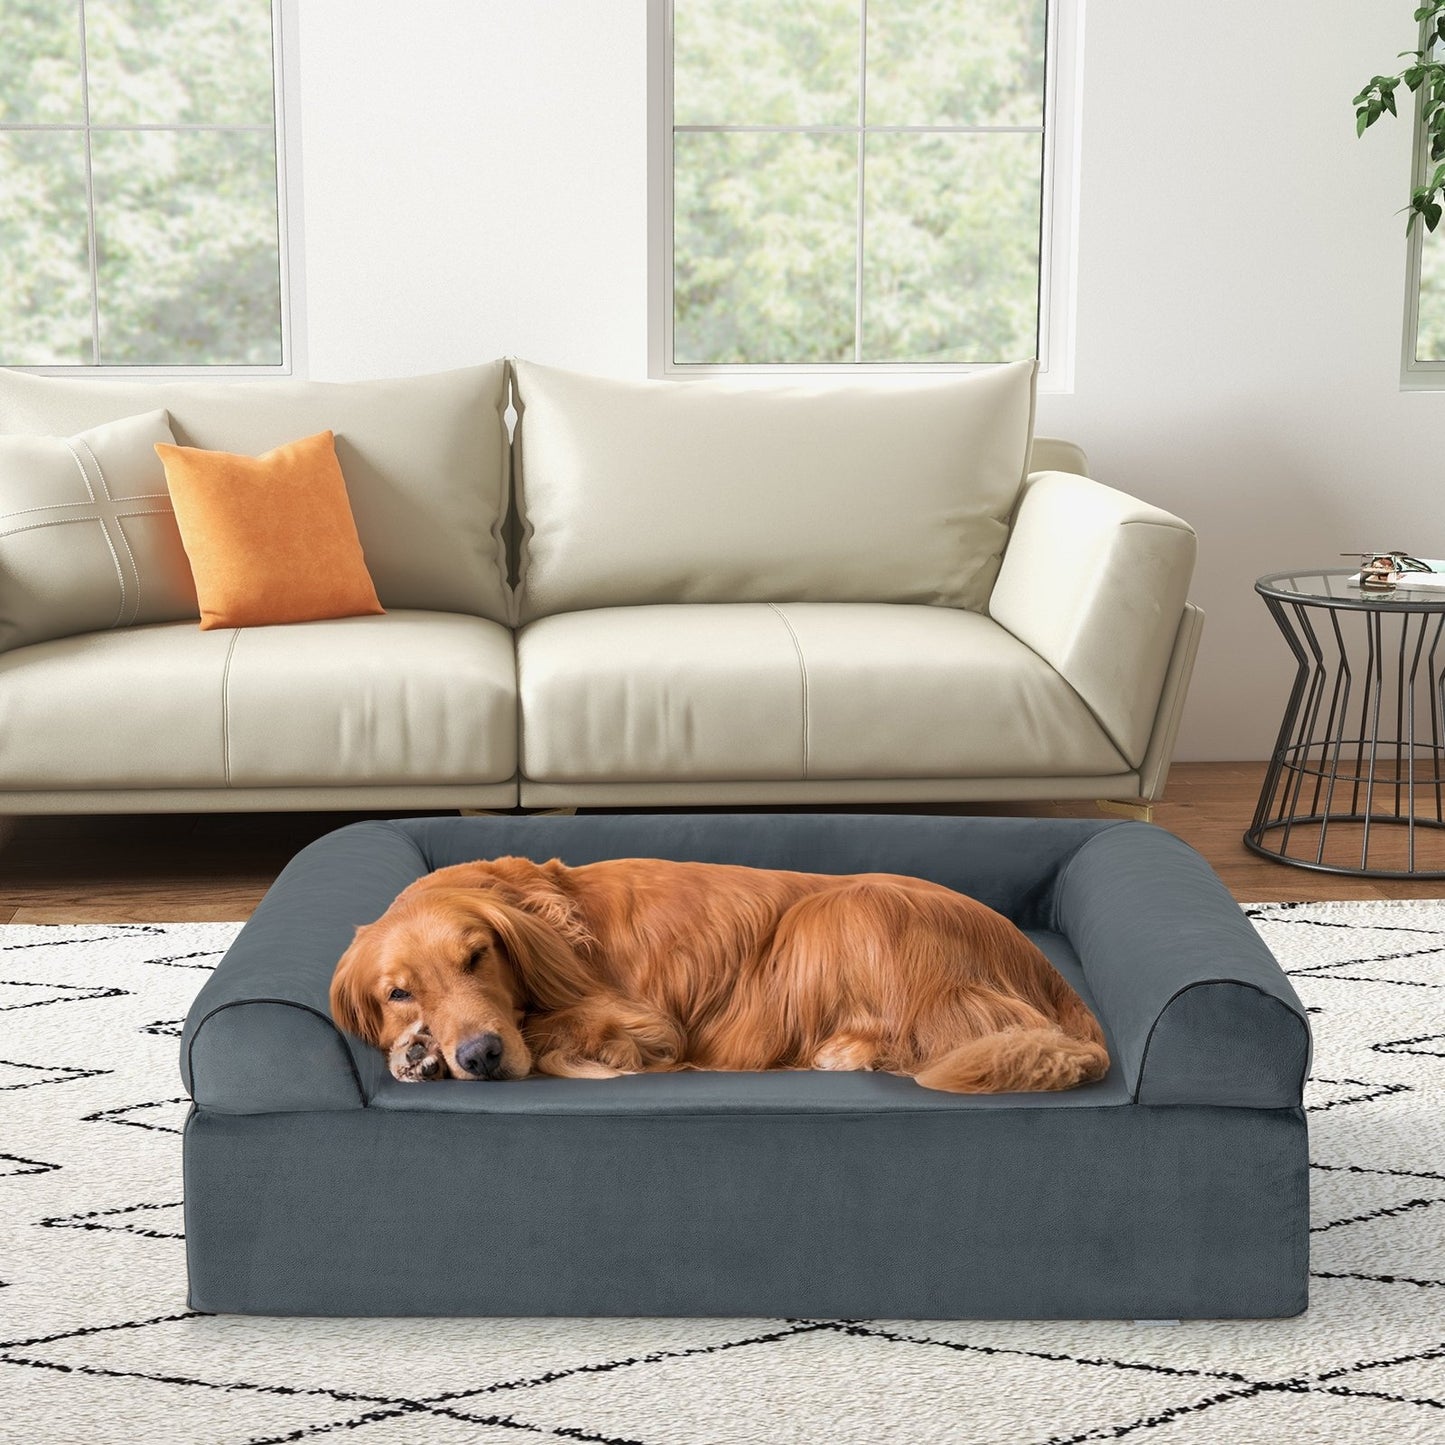 Orthopedic Dog Bed Memory Foam Pet Bed with Headrest for Large Dogs-Grey, Gray